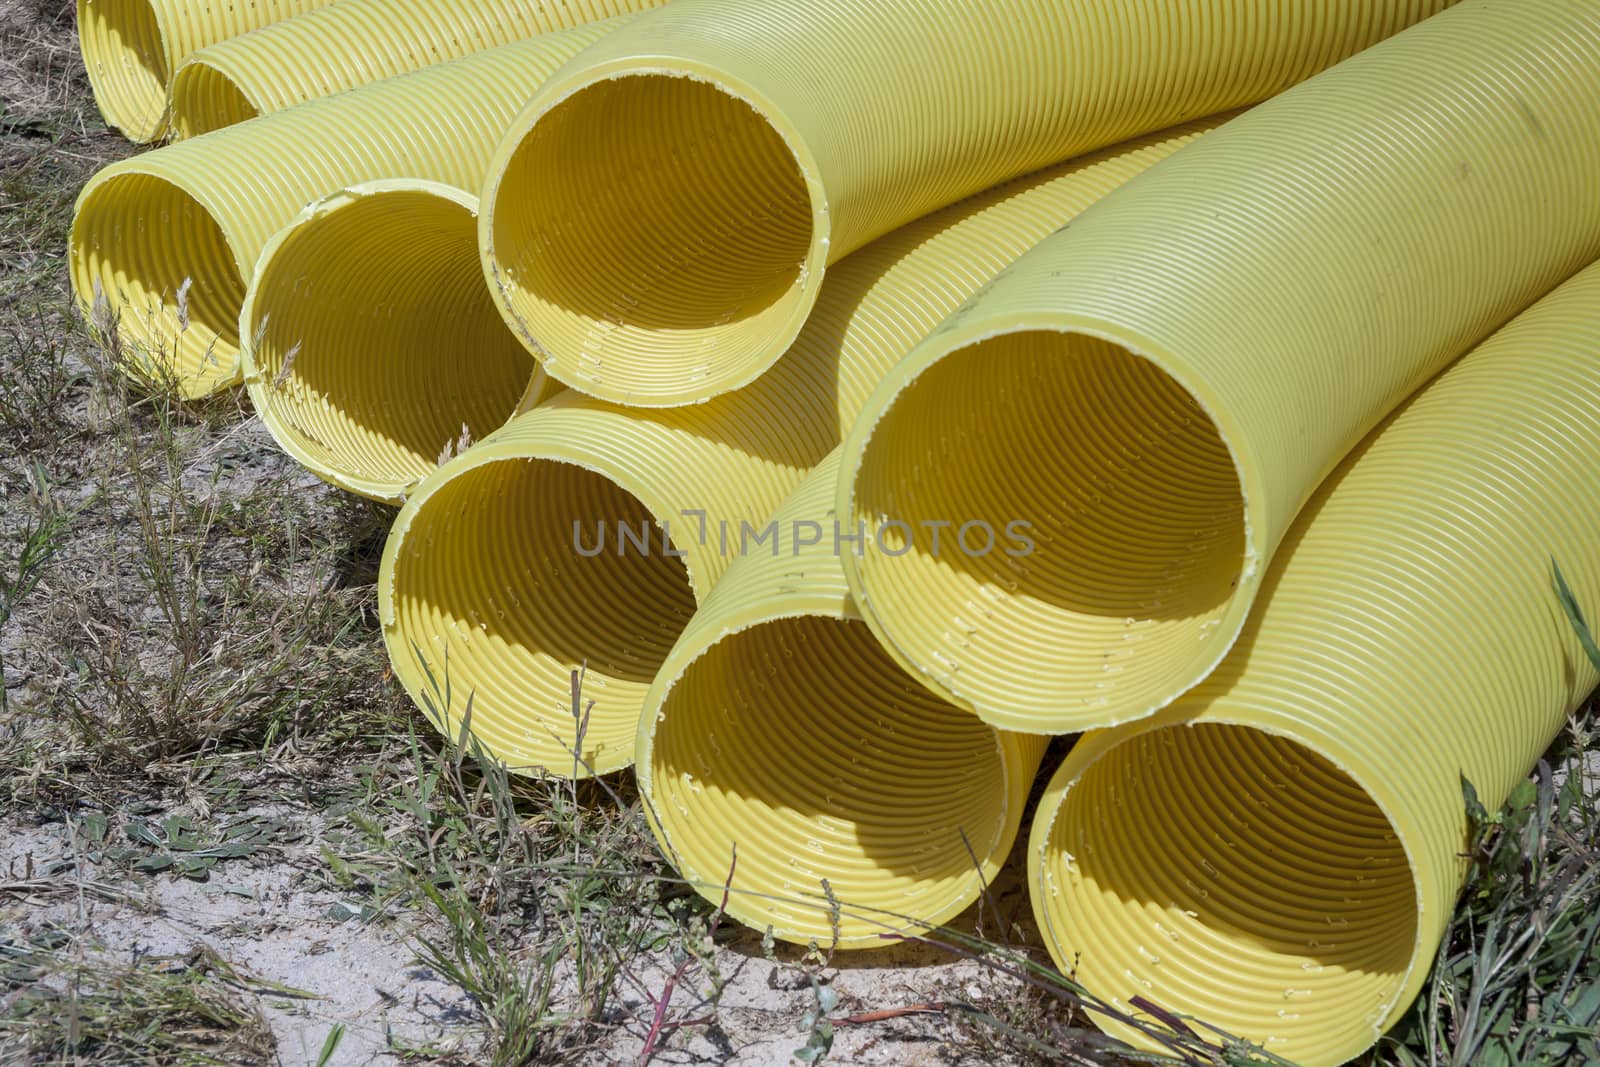 Yellow drain pipe - construction site.